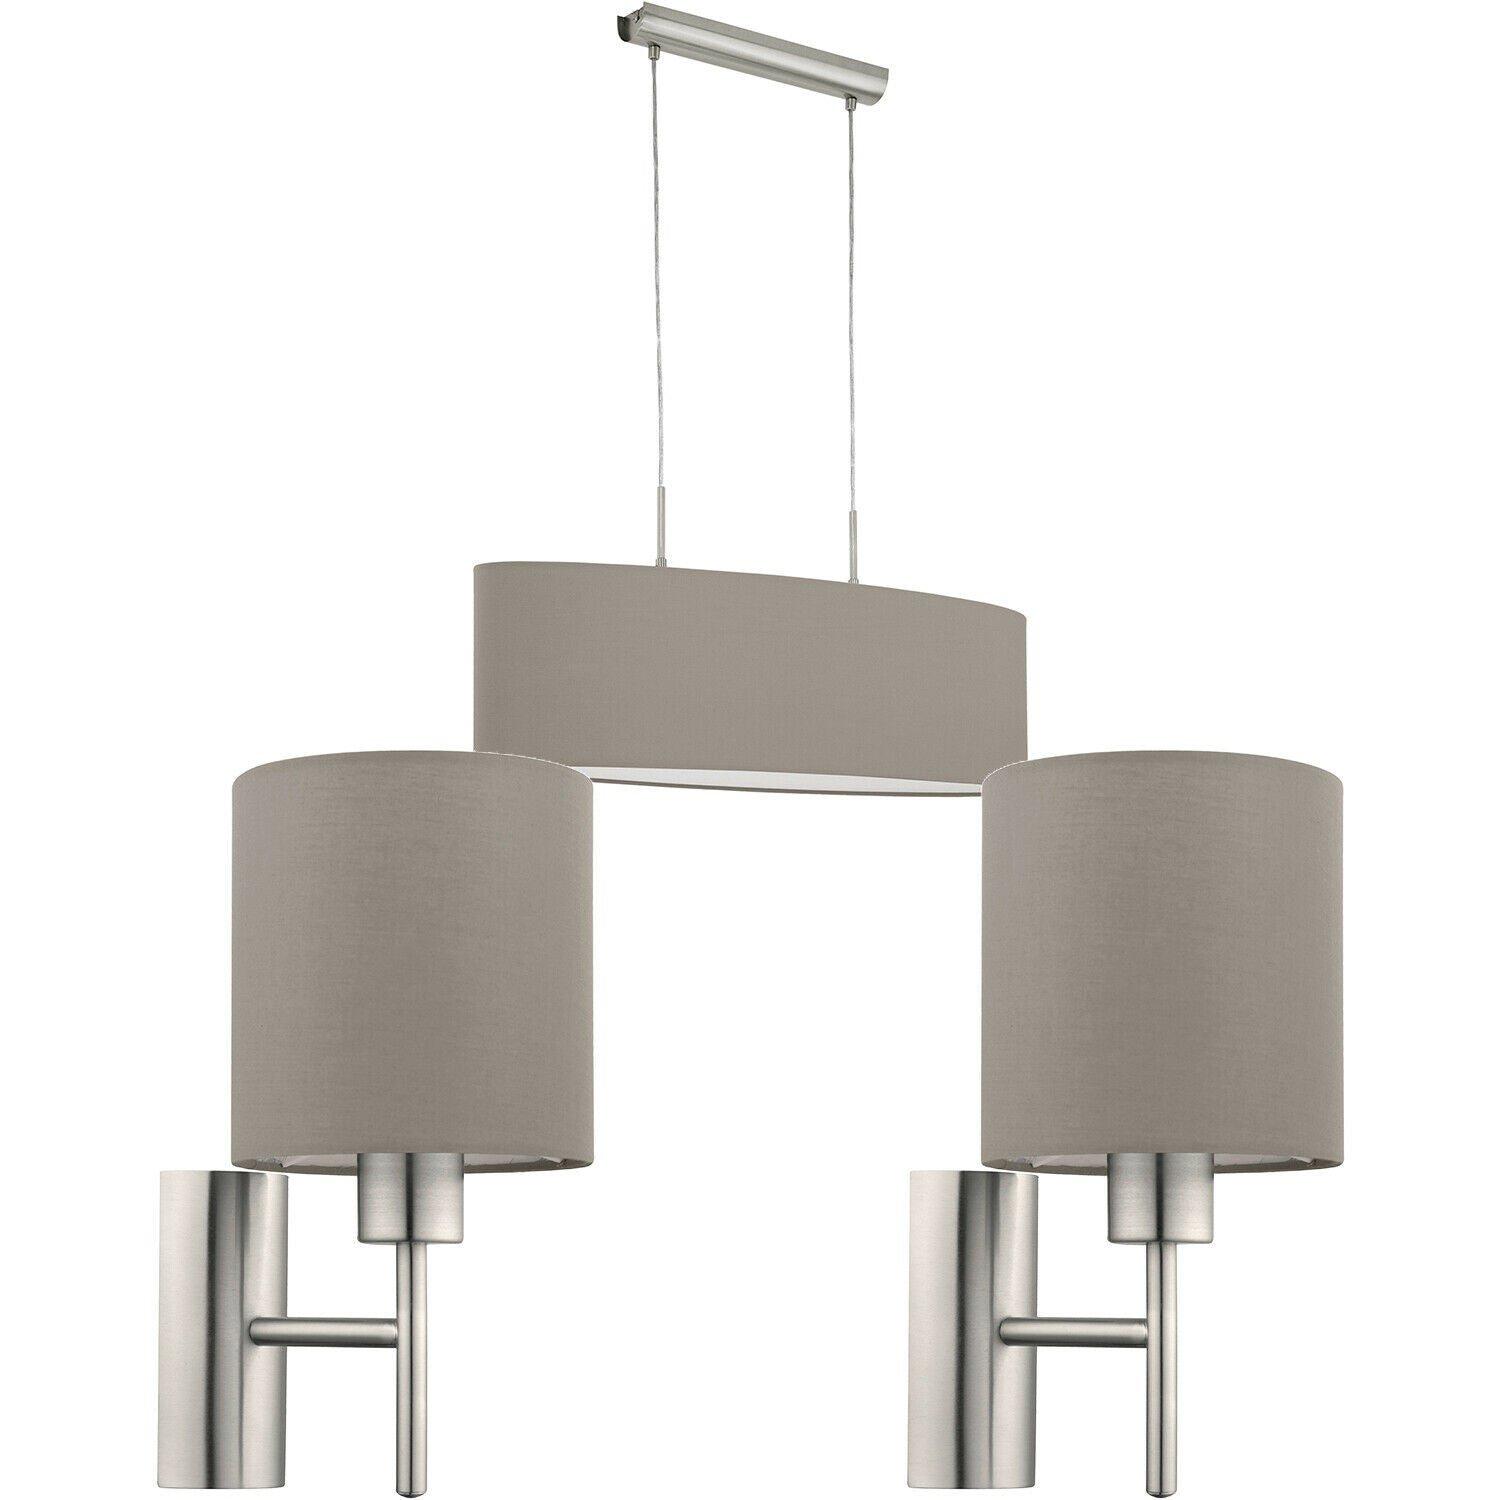 Ceiling Pendant Light & 2x Matching Wall Lights Satin Nickel Taupe Fabric Linear